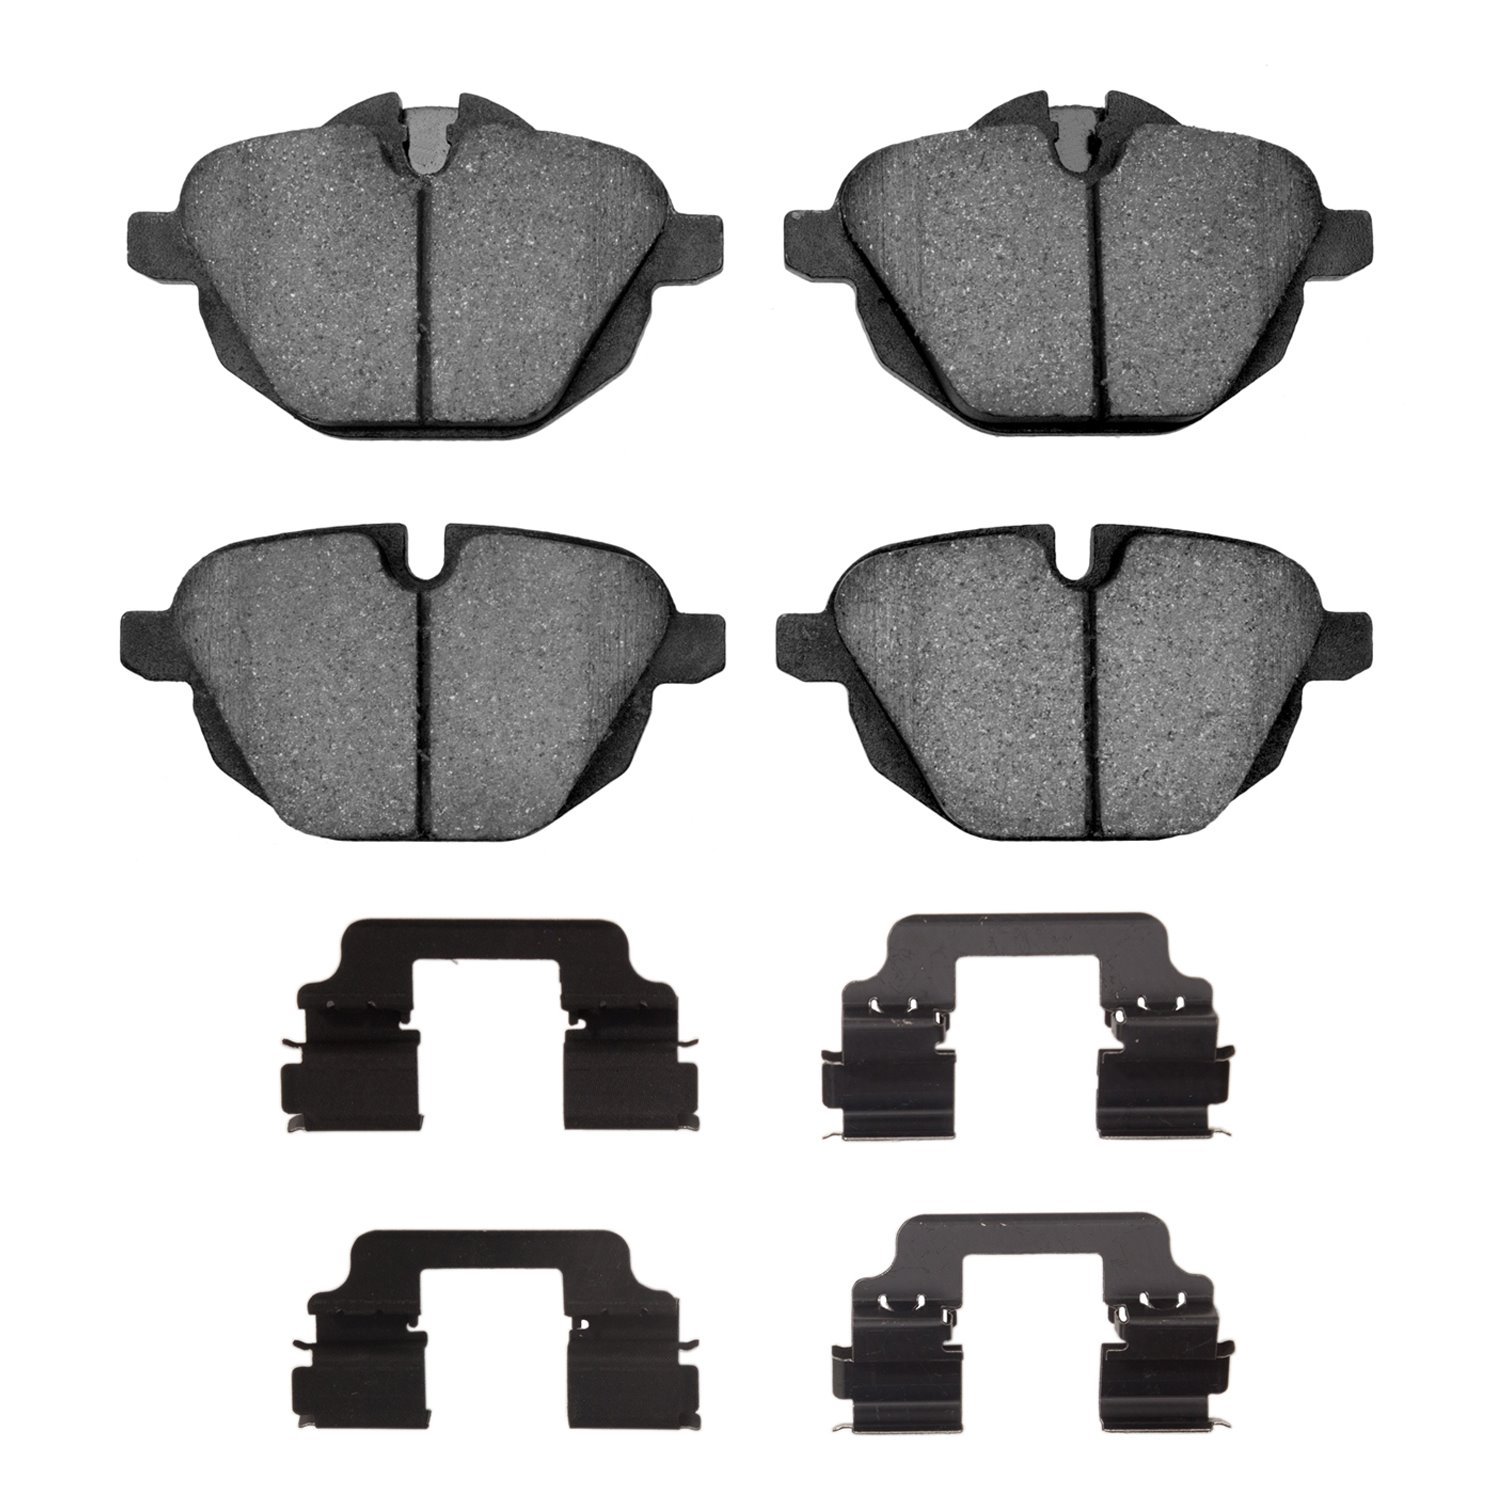 1115-1473-01 Active Performance Brake Pads & Hardware Kit, Fits Select BMW, Position: Rear